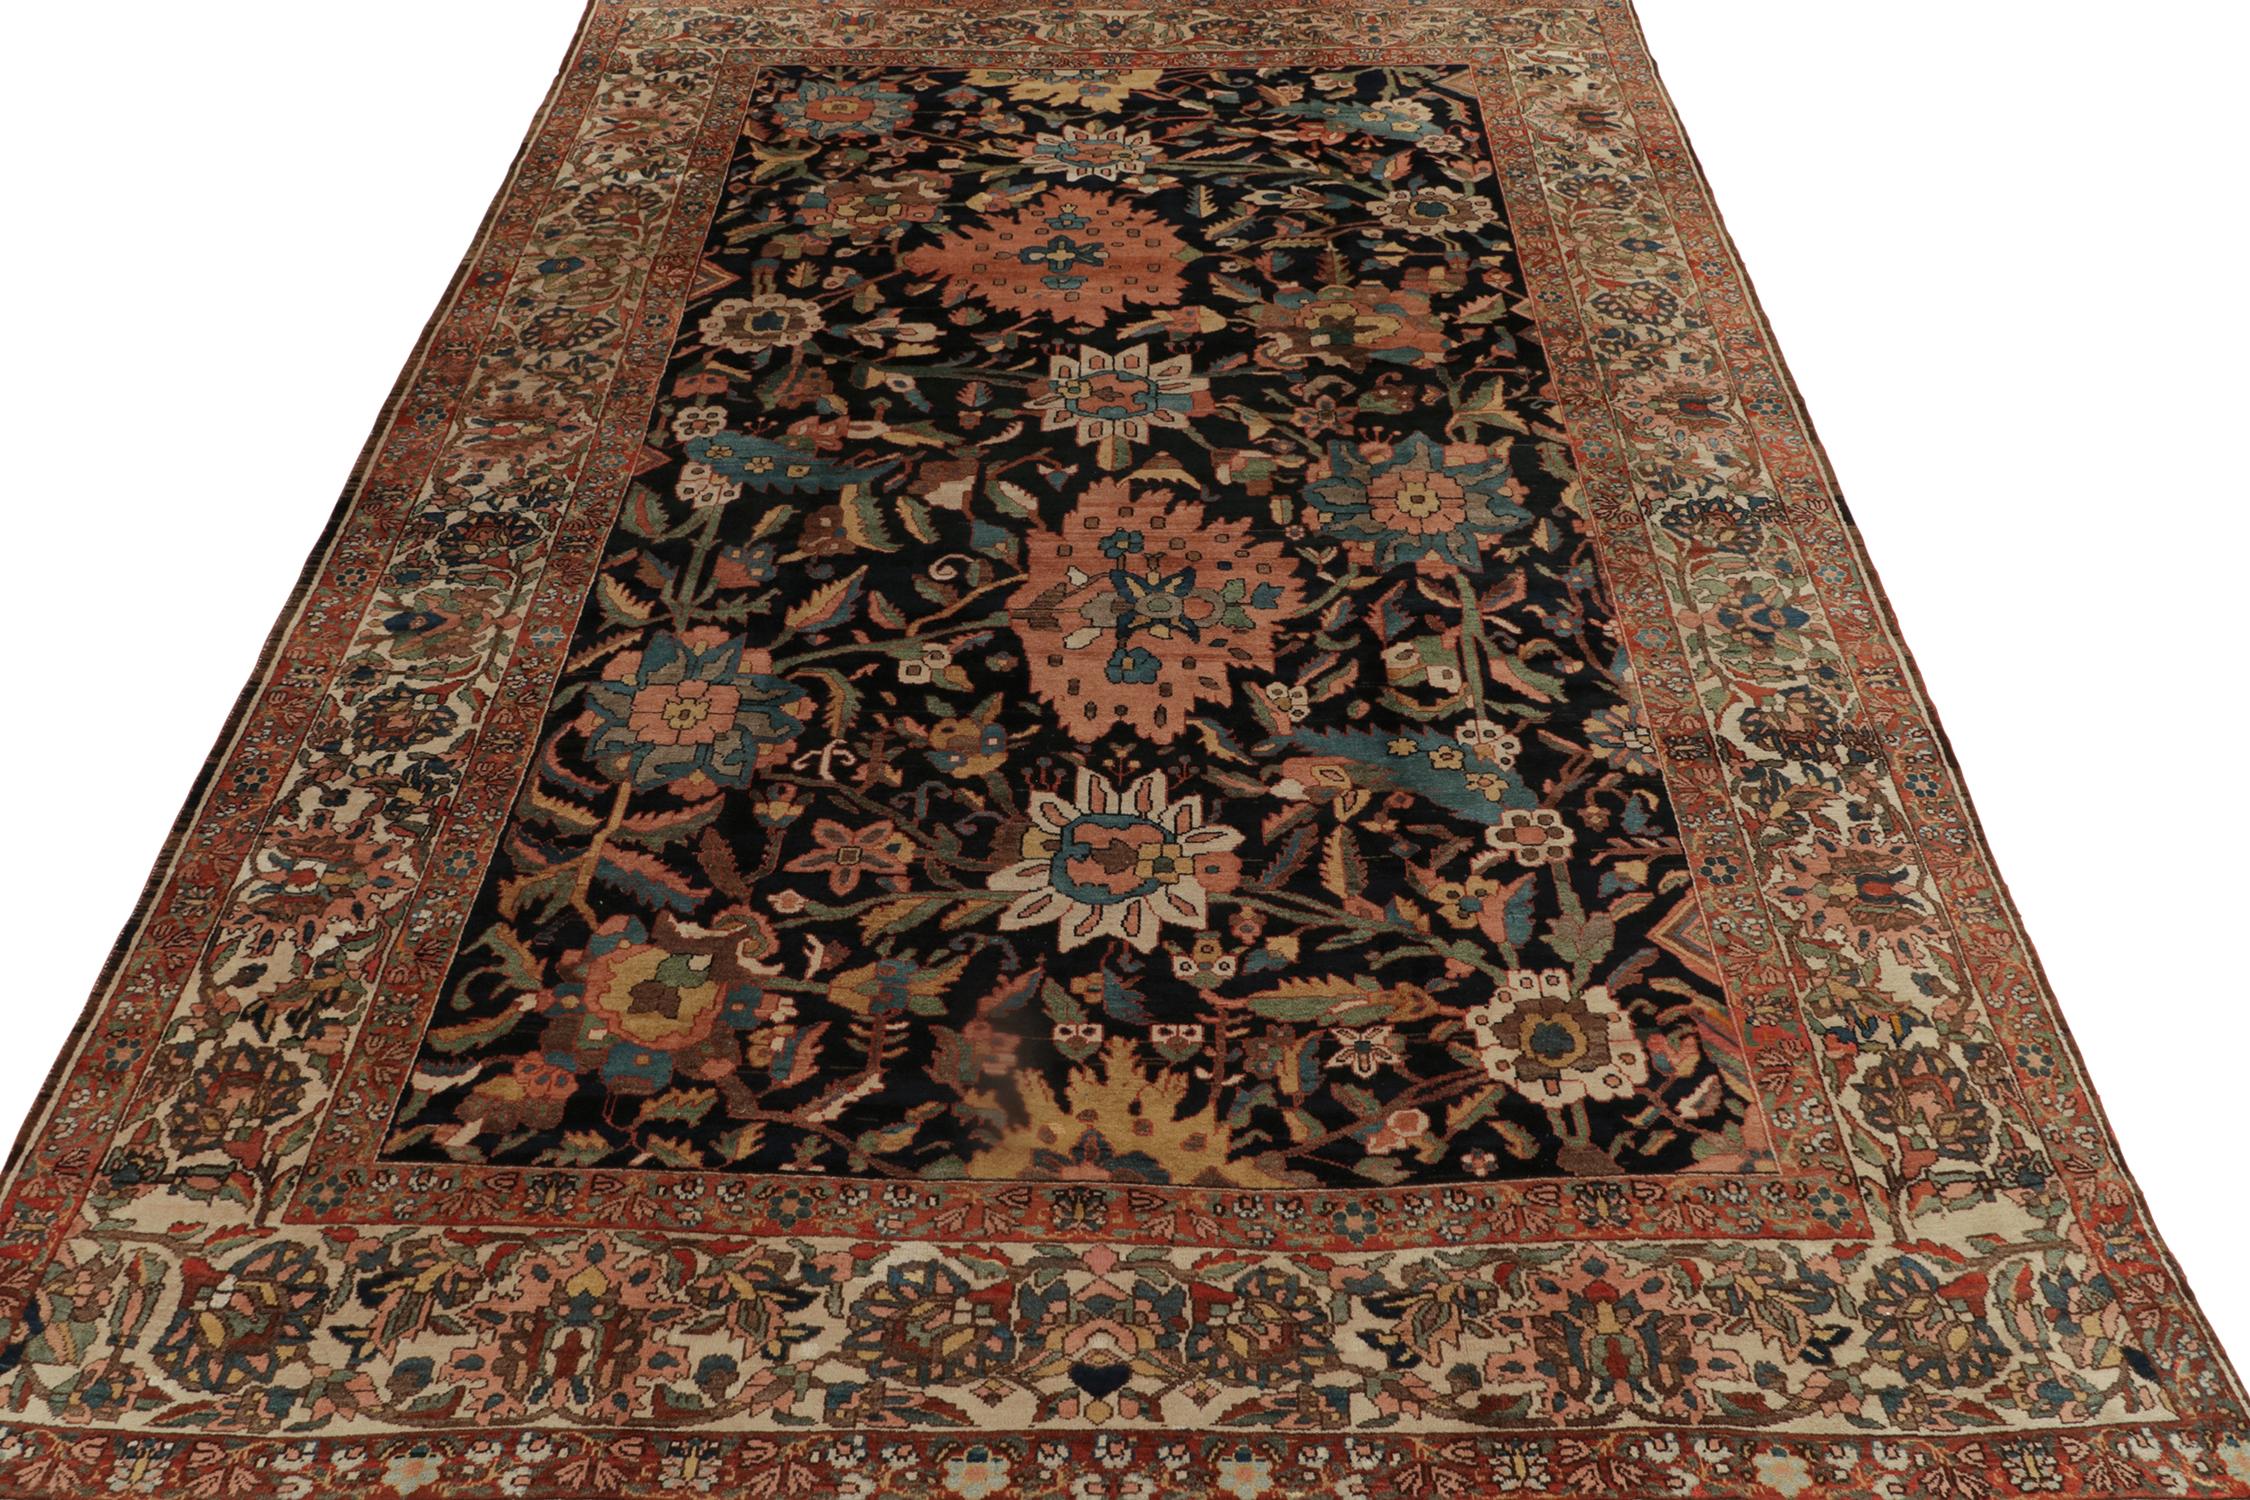 Other Rare Antique Persian Bakhtiari Rug in Red, Black Floral Patterns by Rug & Kilim For Sale